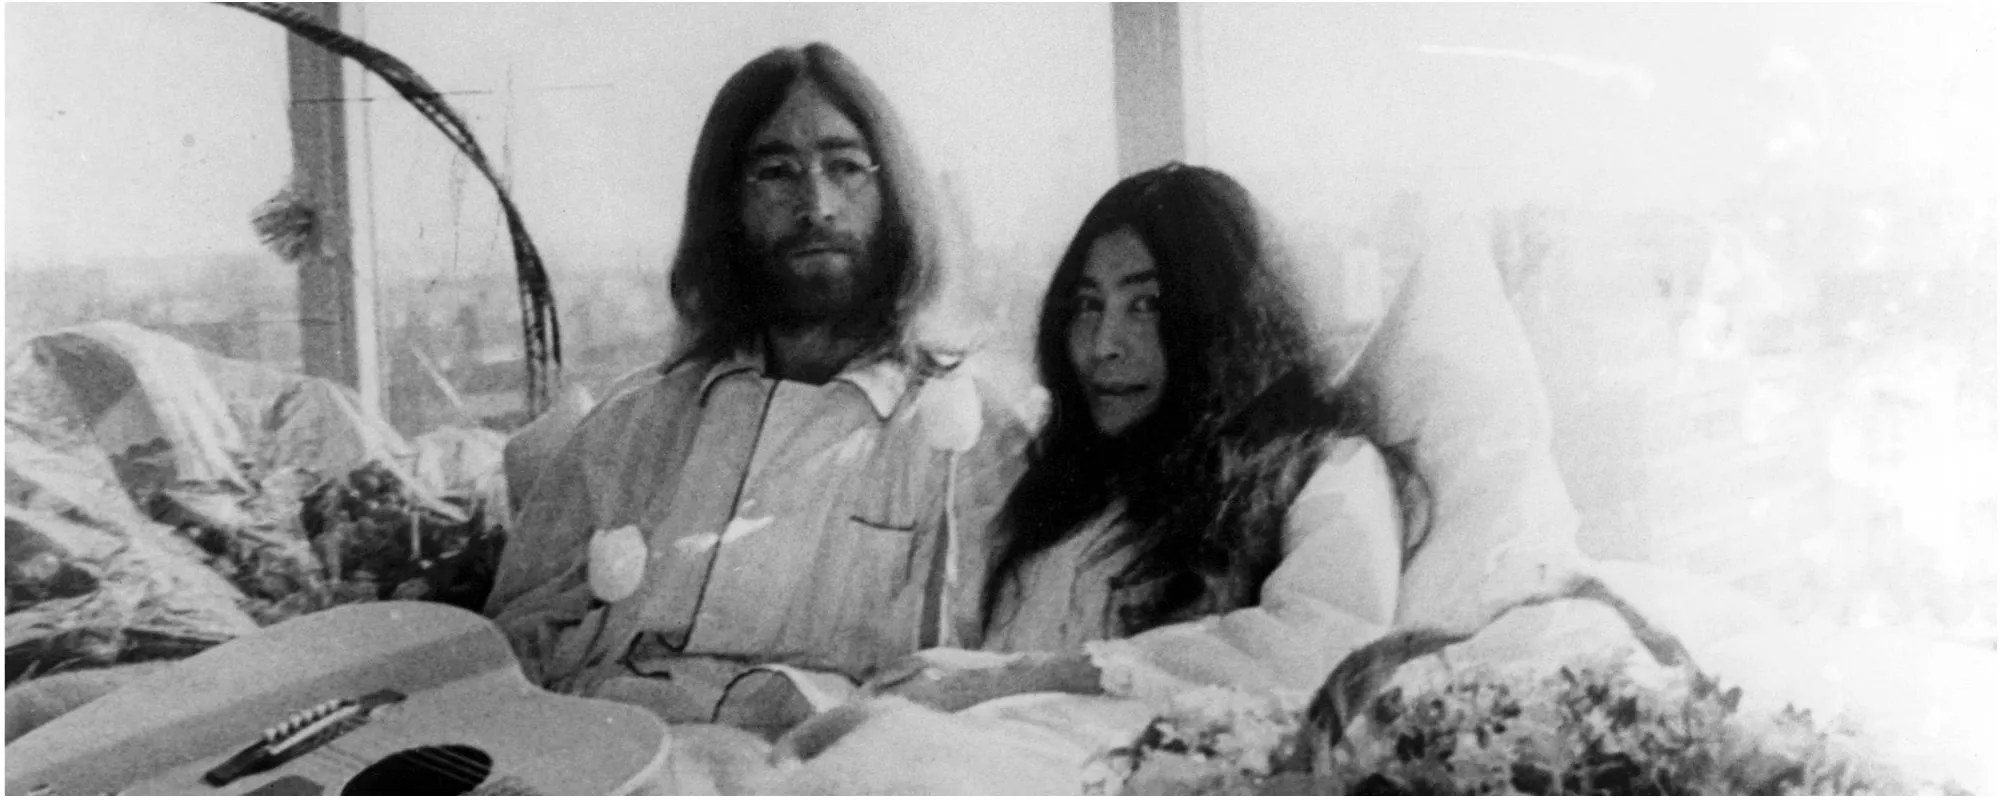 Remember When: John Lennon and Yoko Ono Stage Bed-ins for Peace